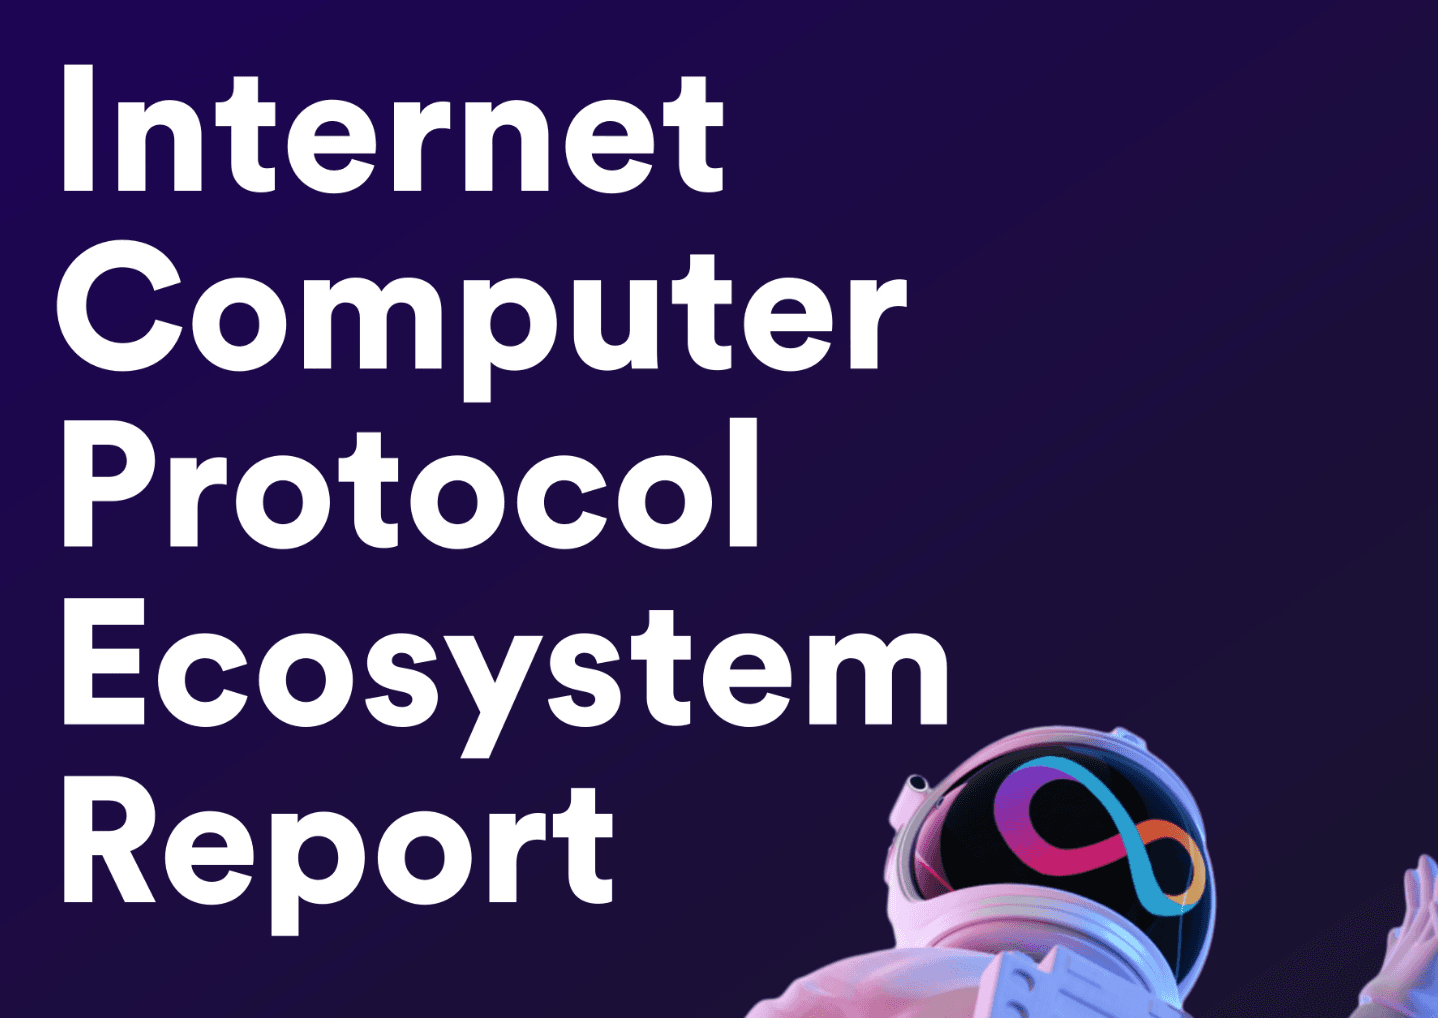 Users Commit $80M to Internet Computer Ecosystem